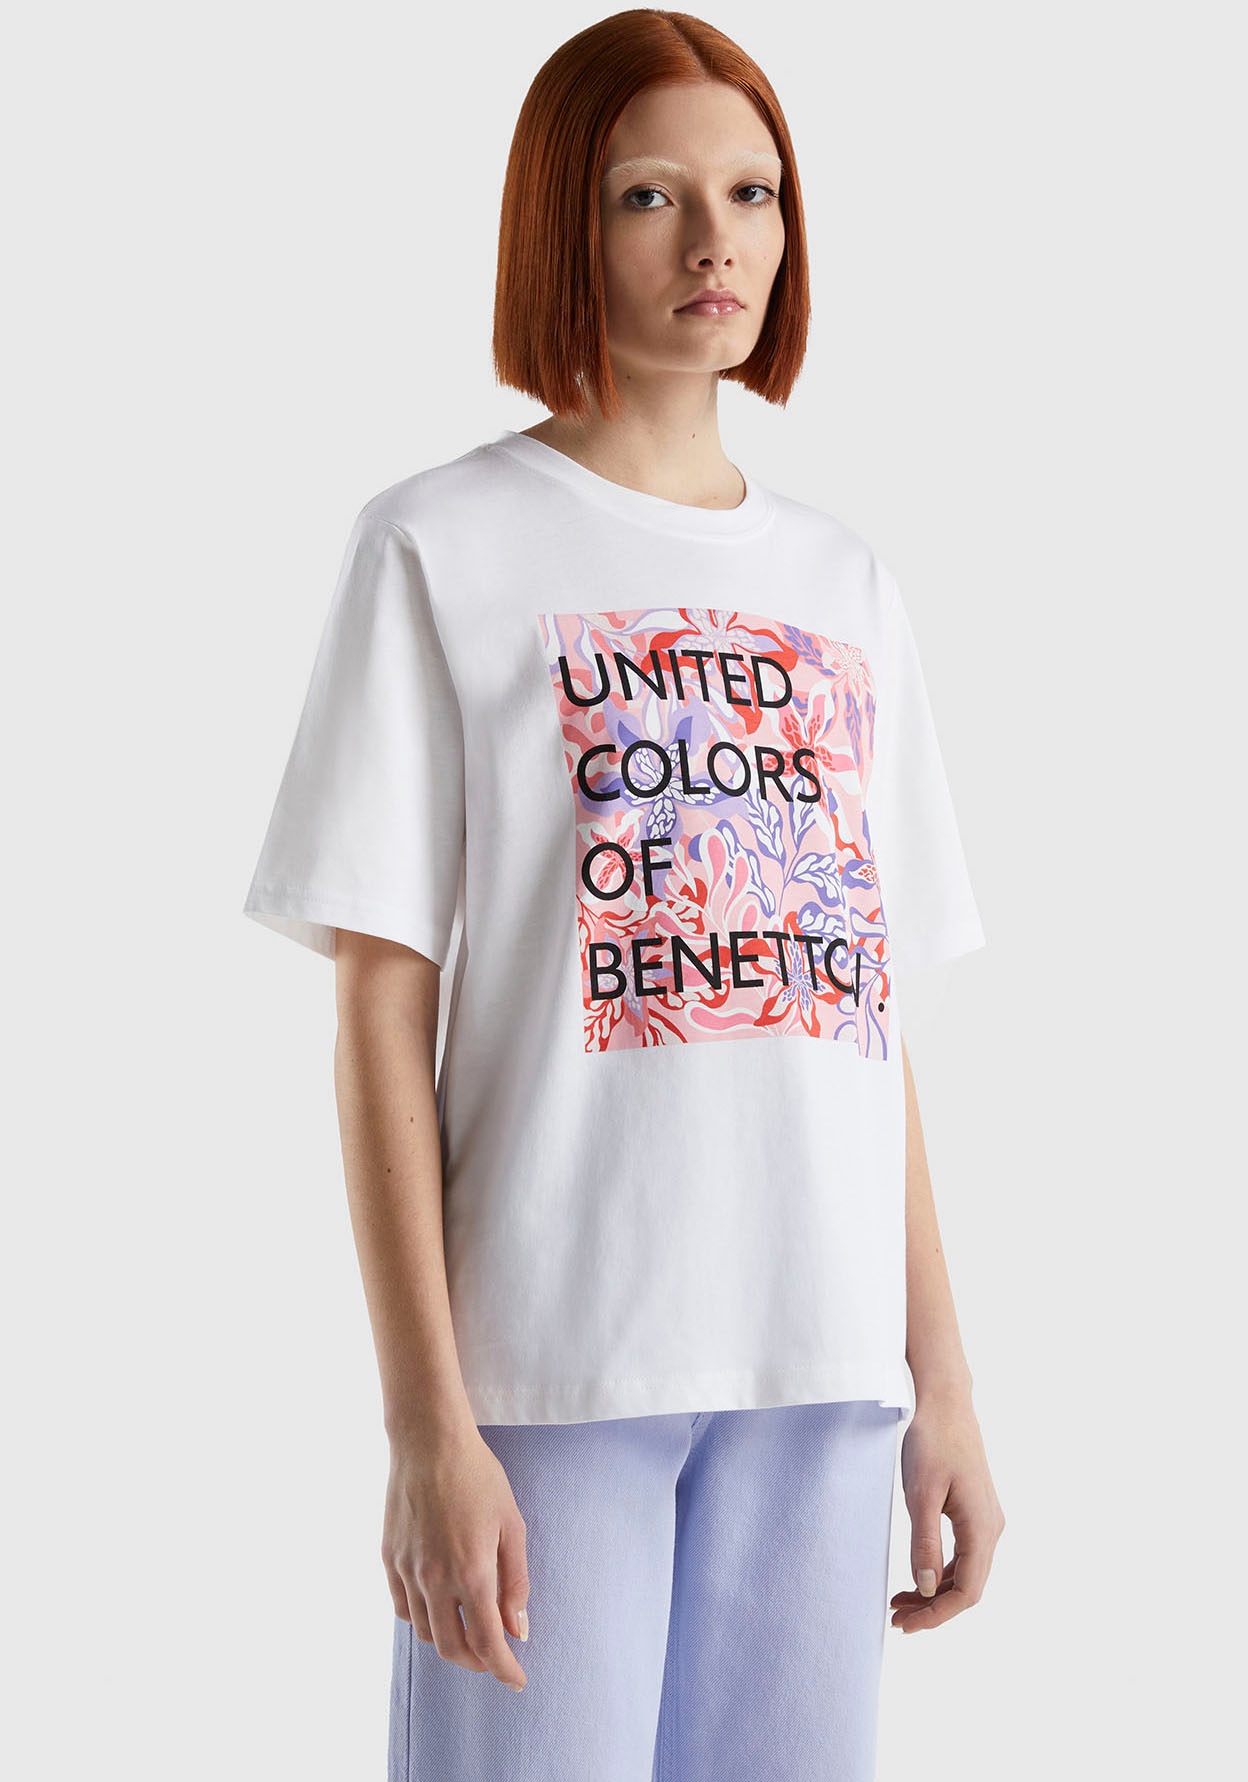 Colors T-Shirt United bei ♕ Benetton of